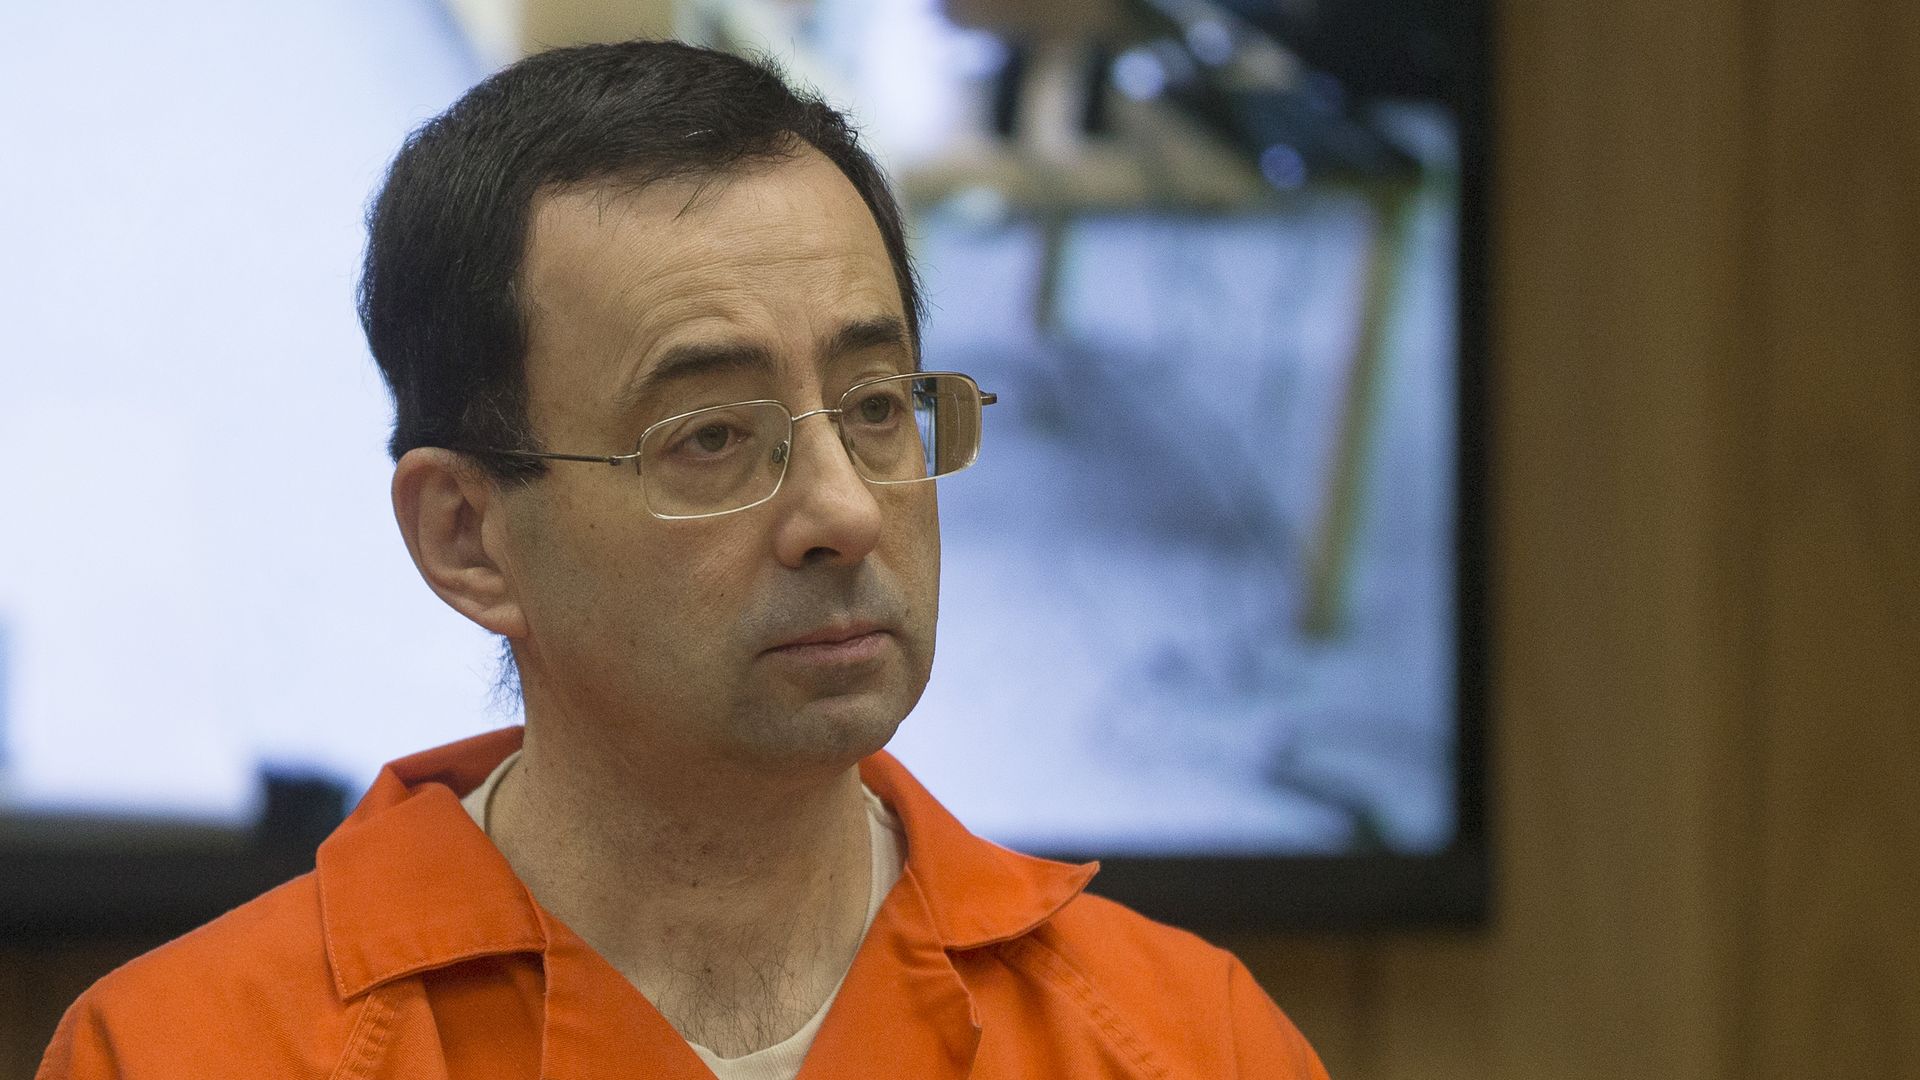 Former Michigan State University and USA Gymnastics doctor Larry Nassar appears in court for his final sentencing phase in Eaton County Circuit Court on February 5, 2018 in Charlotte, Michigan